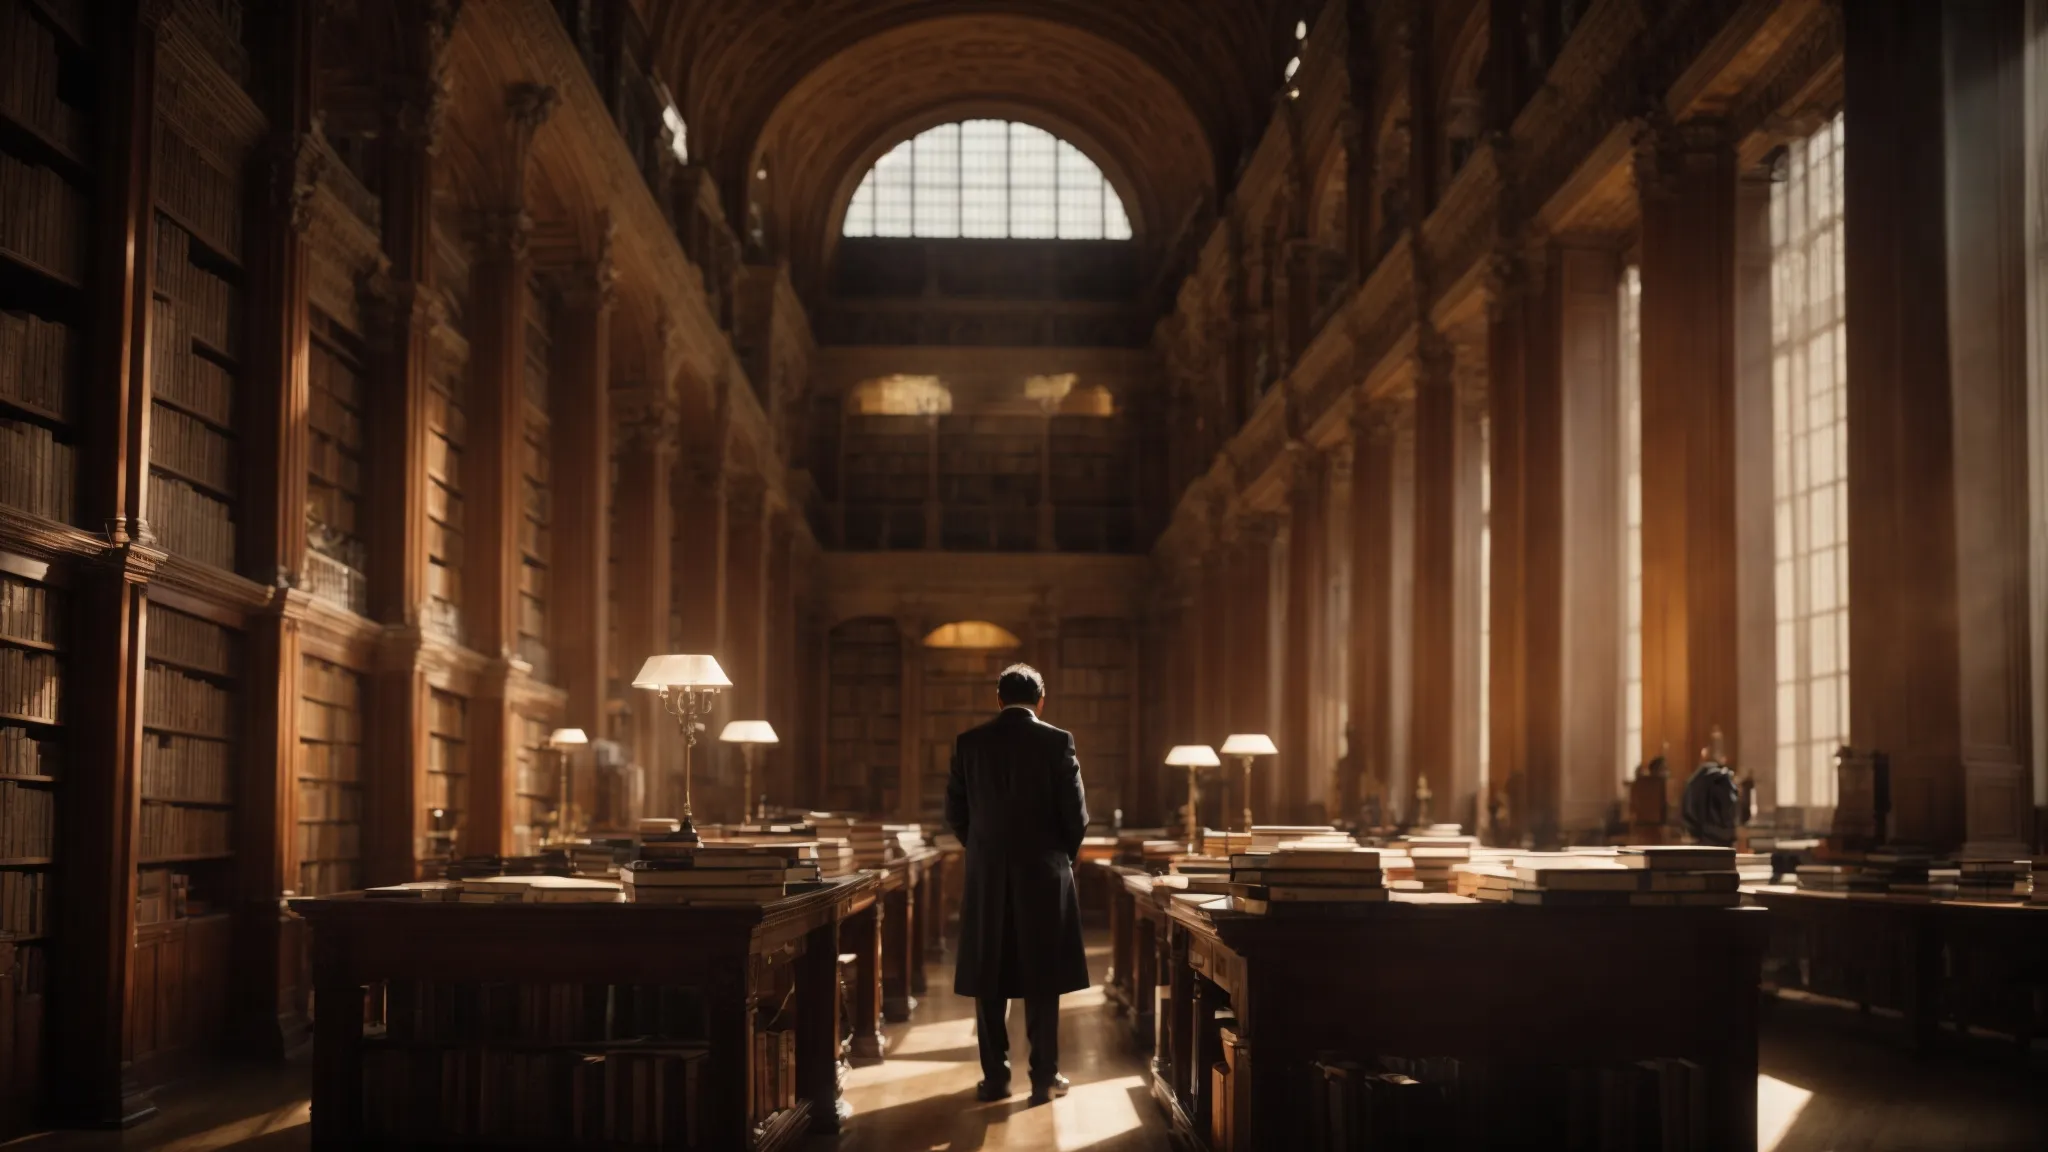 a scientist stands alone in a vast library, deeply engrossed in a large, ancient book, surrounded by the soft glow of natural light filtering through the windows.